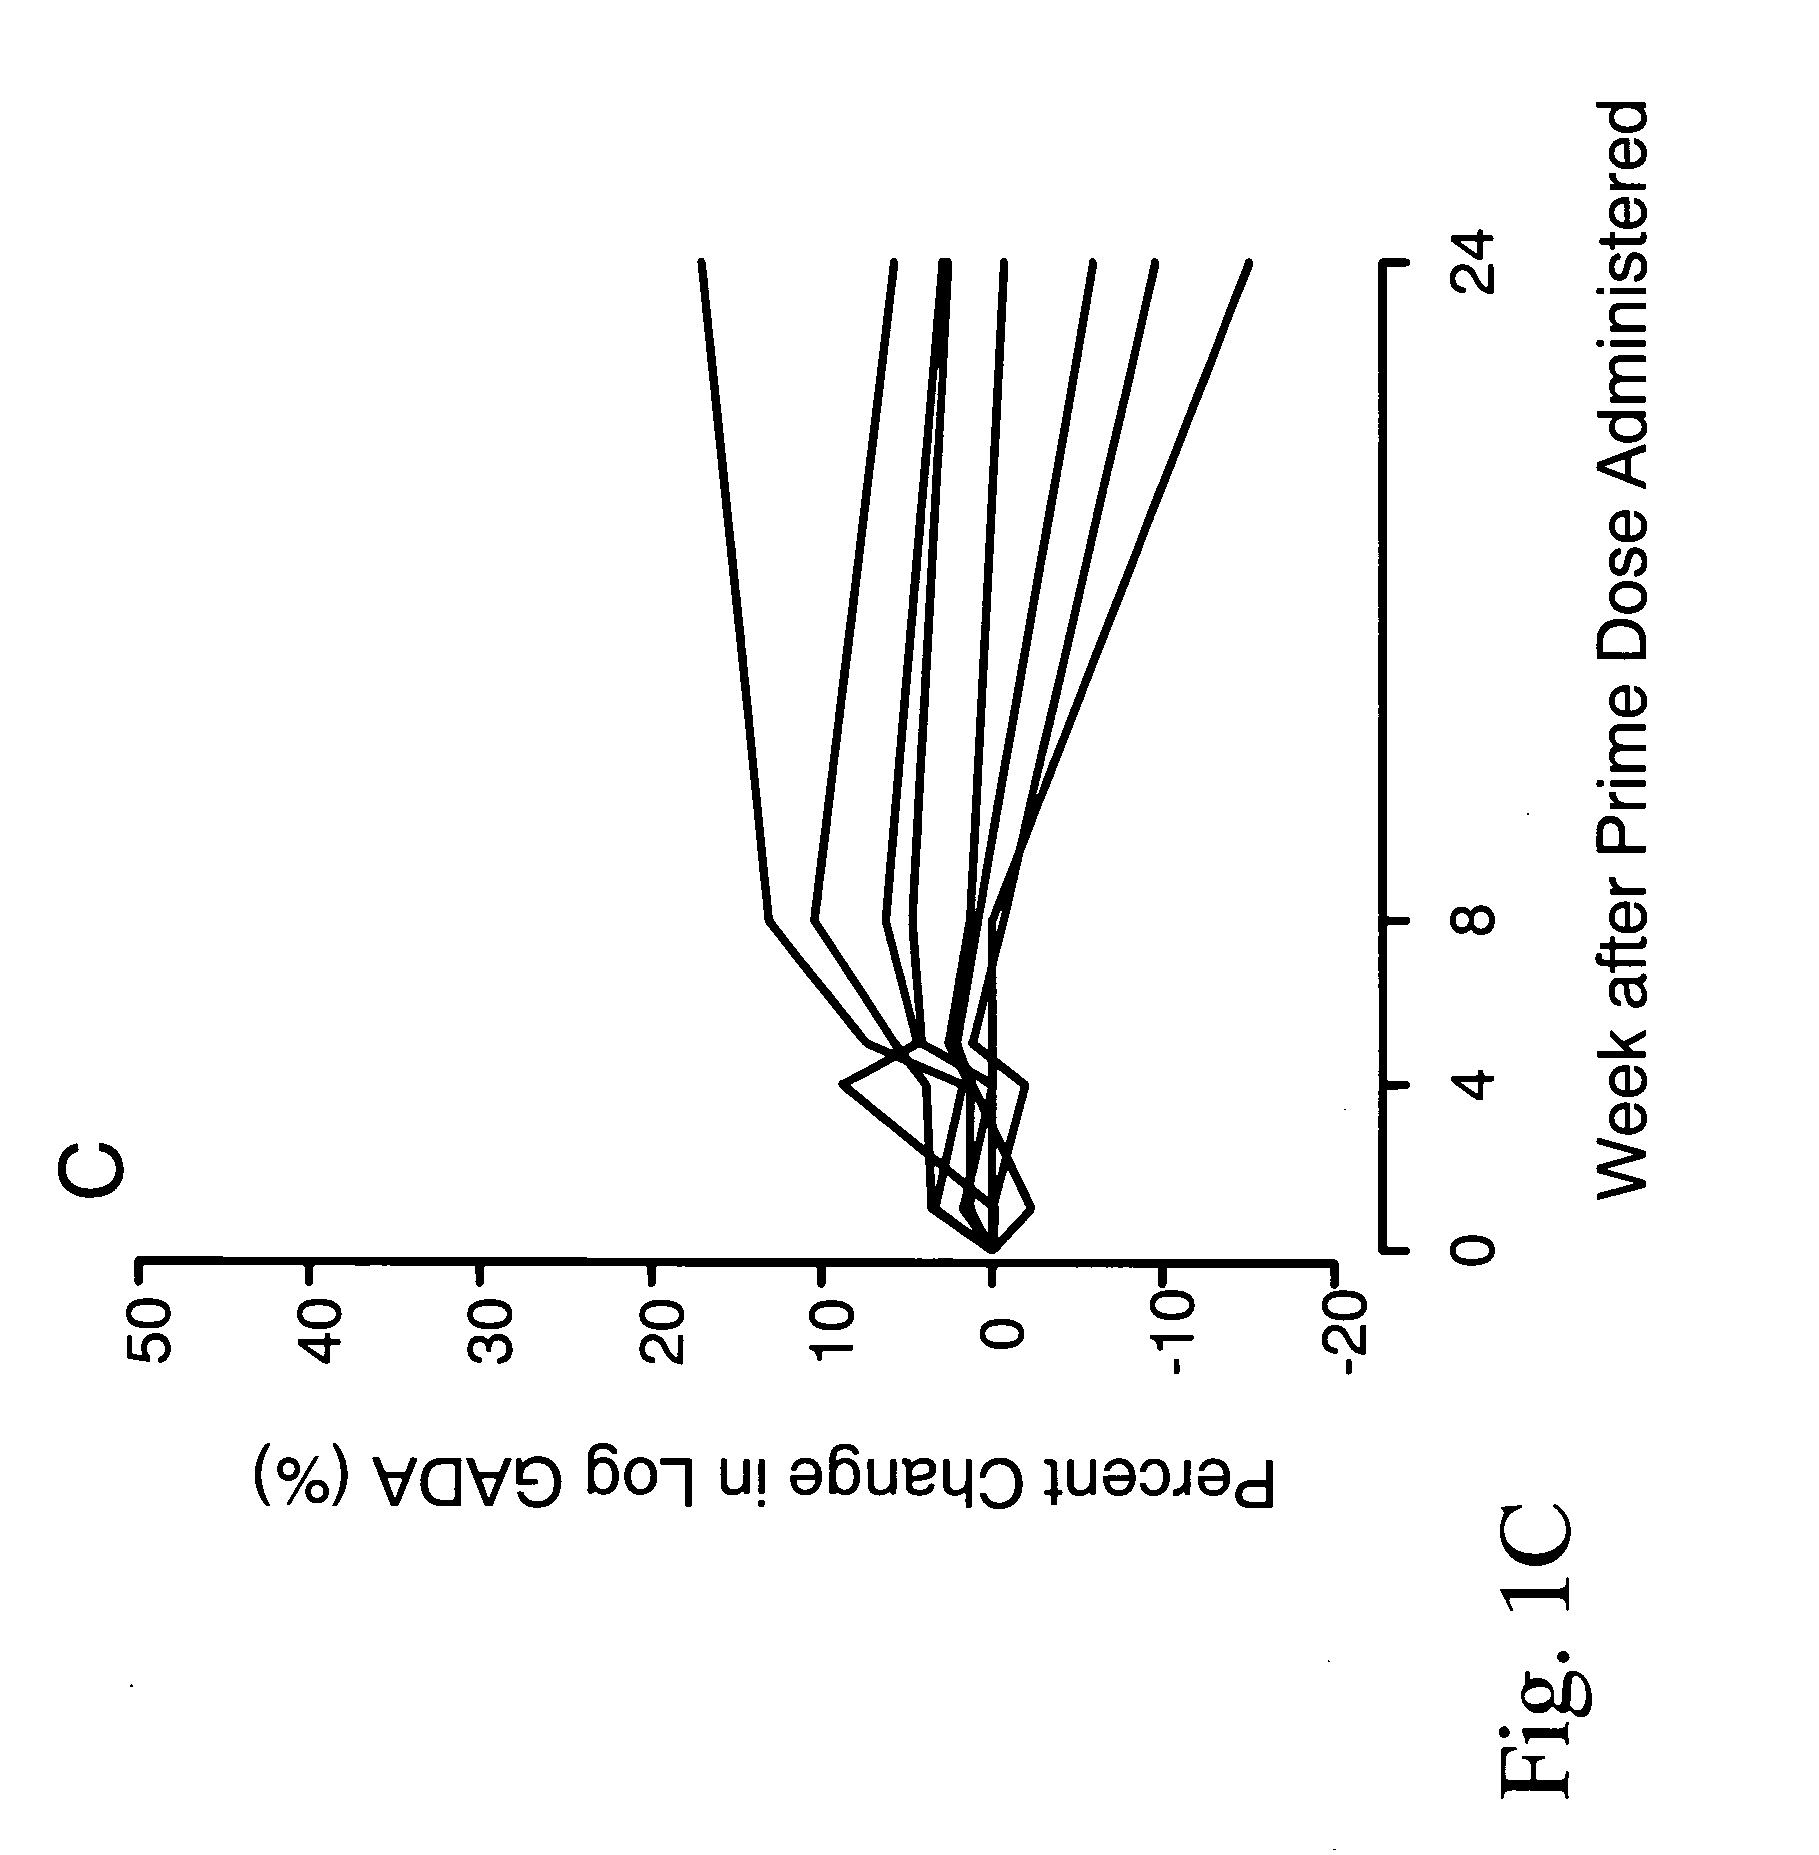 Immunomodulation by a therapeutic medication intended for treatment of diabetes and prevention of autoimmune diabetes